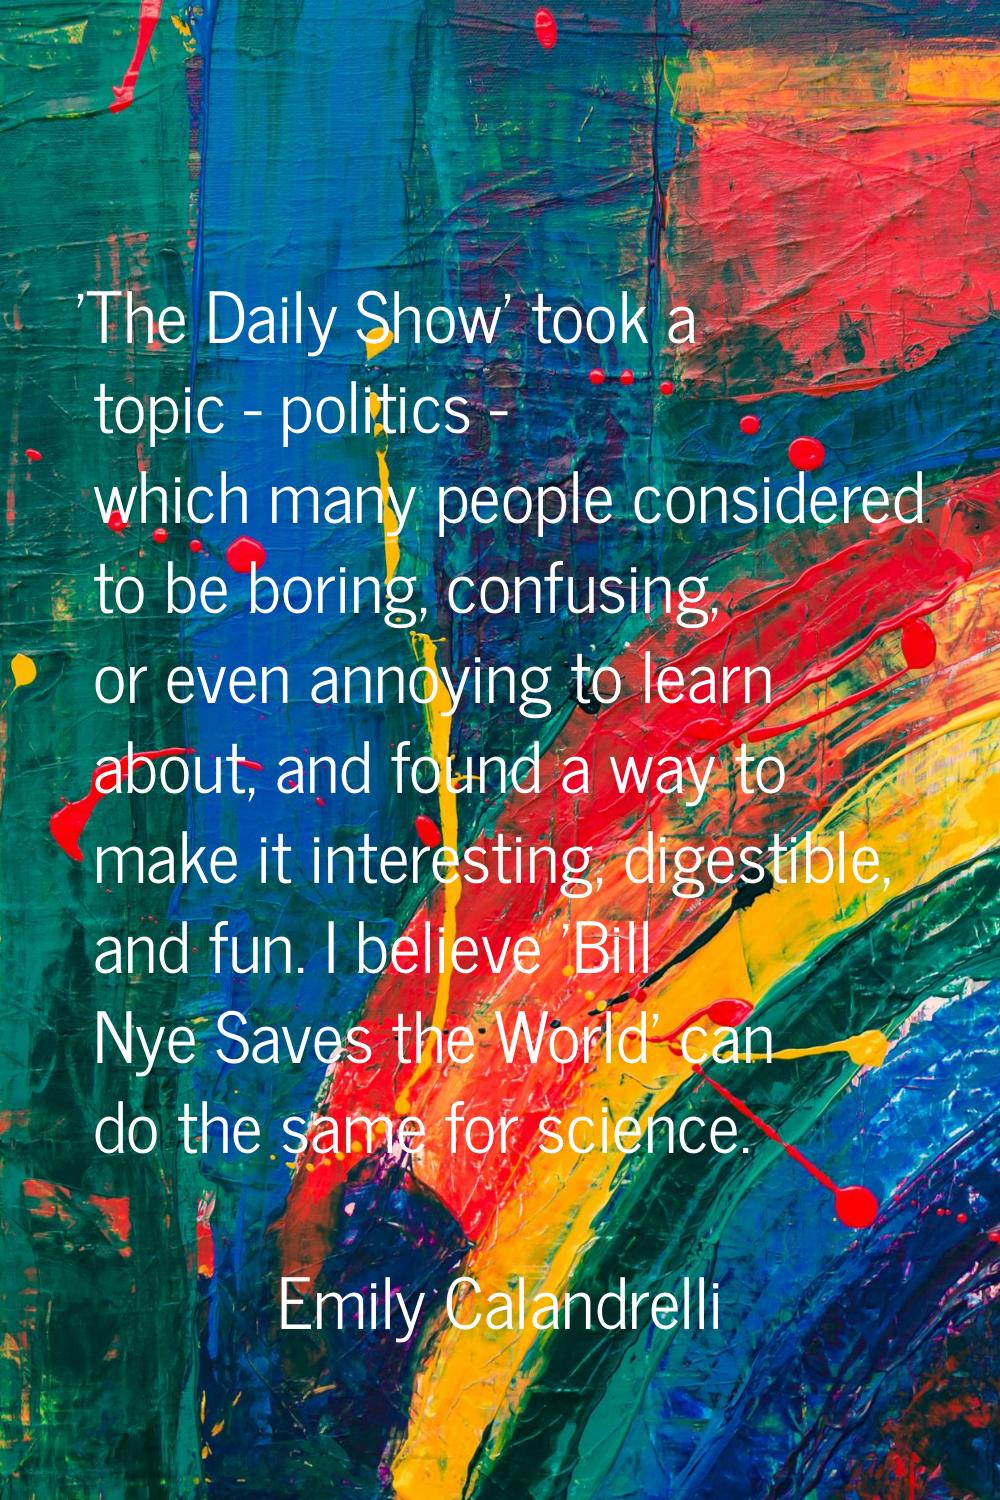 'The Daily Show' took a topic - politics - which many people considered to be boring, confusing, or